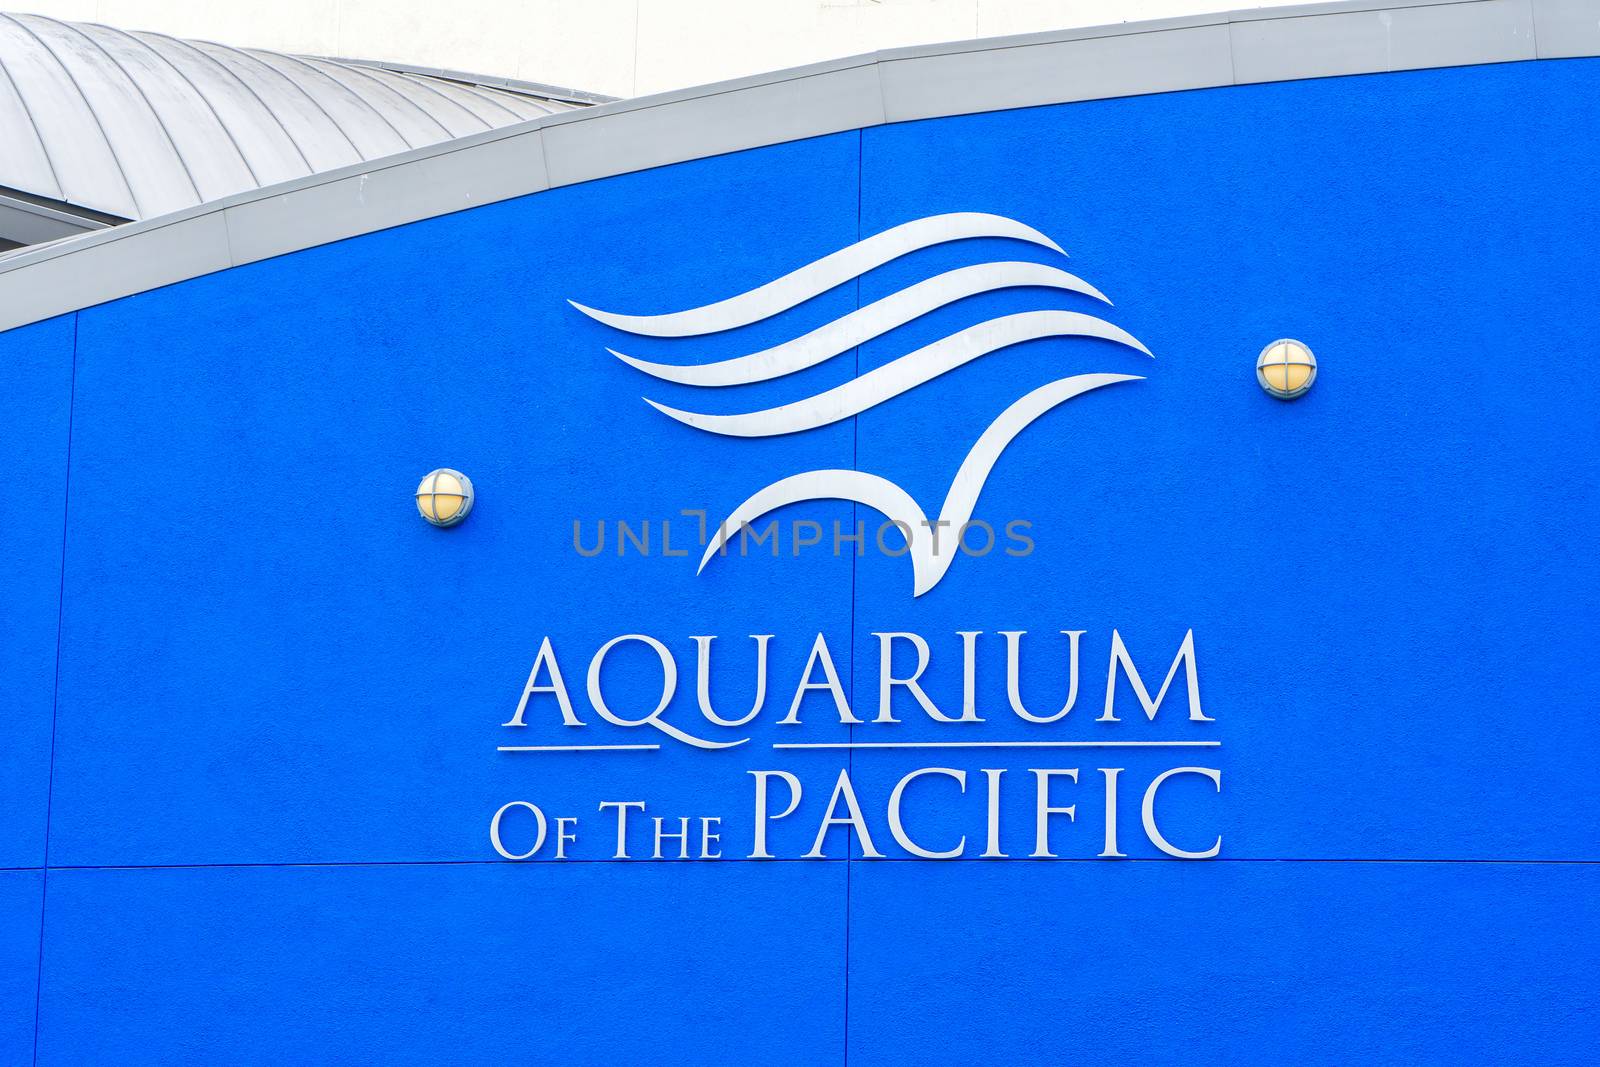 Aquarium of the Pacific Exterior and Logo. by wolterk